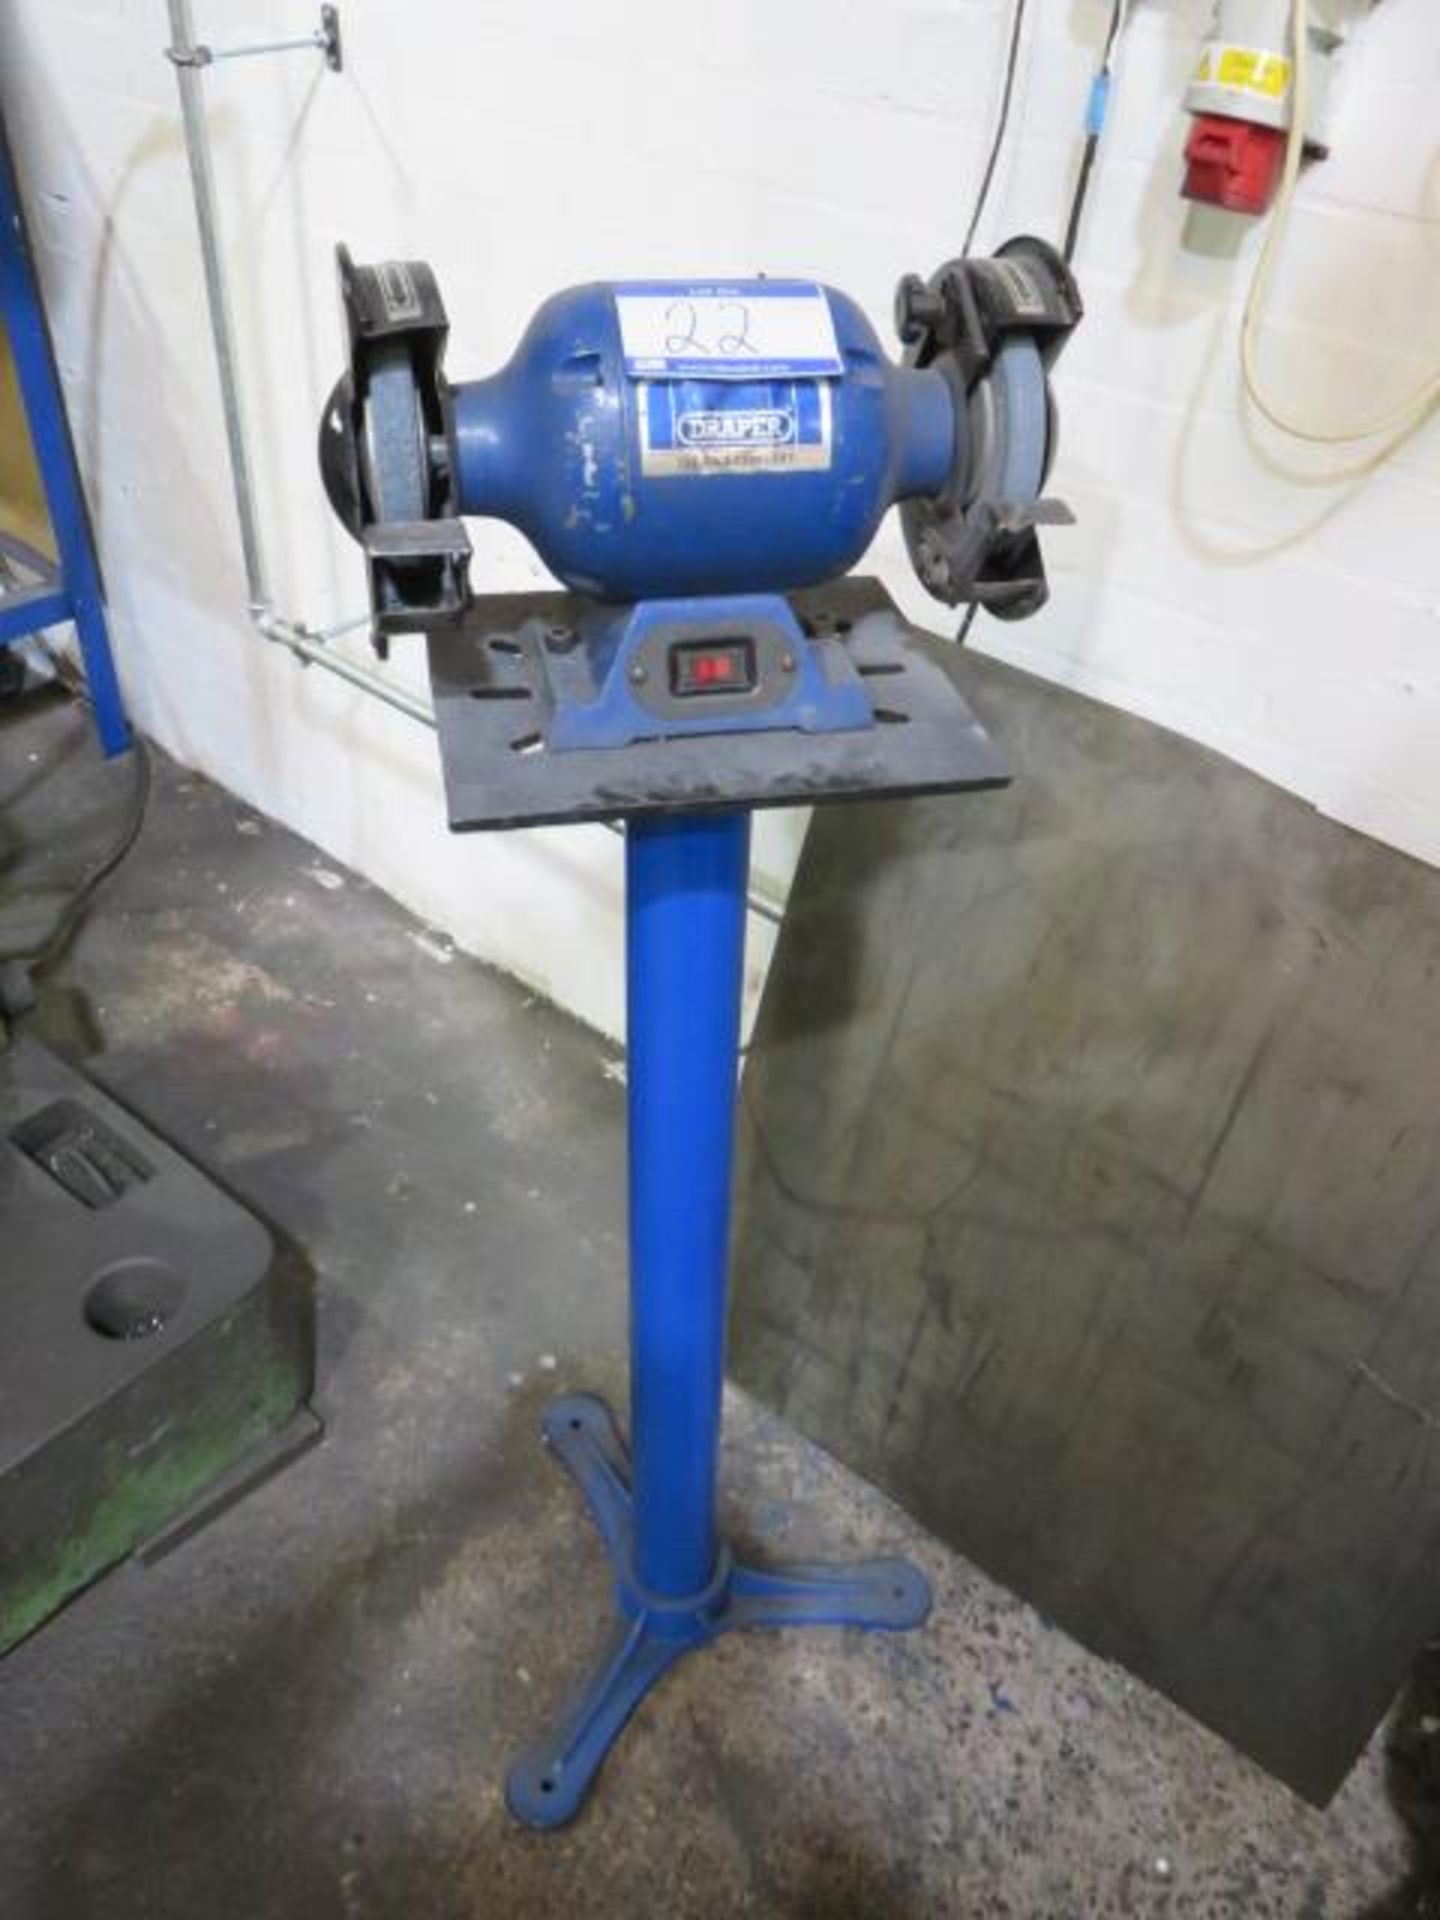 Draper Twin Ended Bench Grinder. Serial No. 99101590 on Pedestal Stand